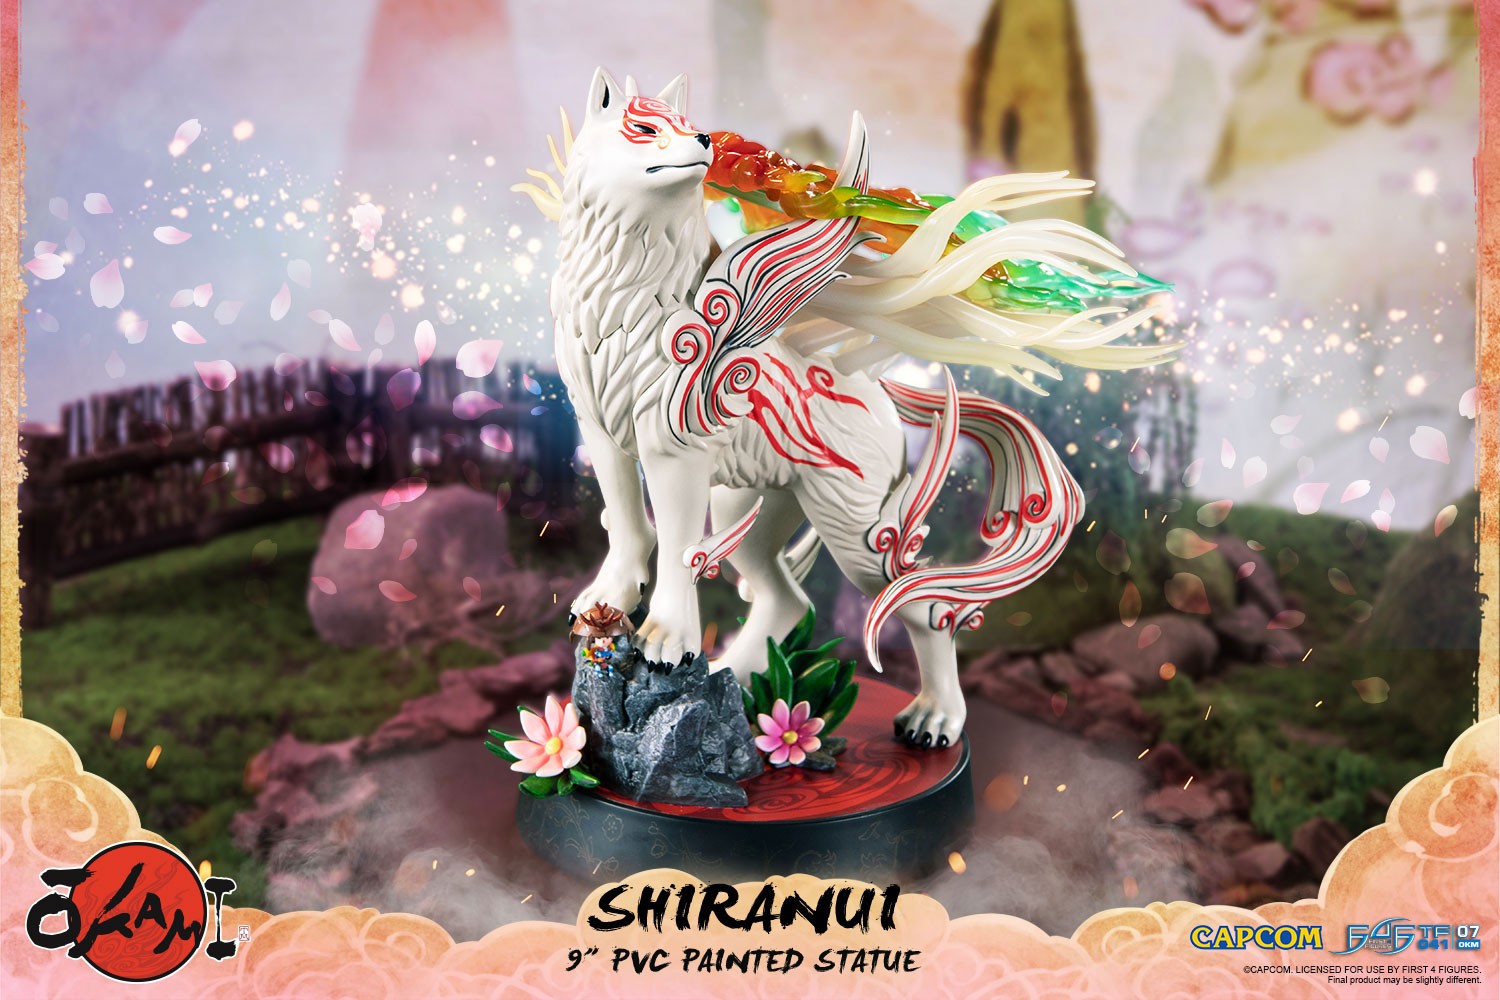 Shiranui (Standard Pose) Statue by First 4 Figures | Sideshow